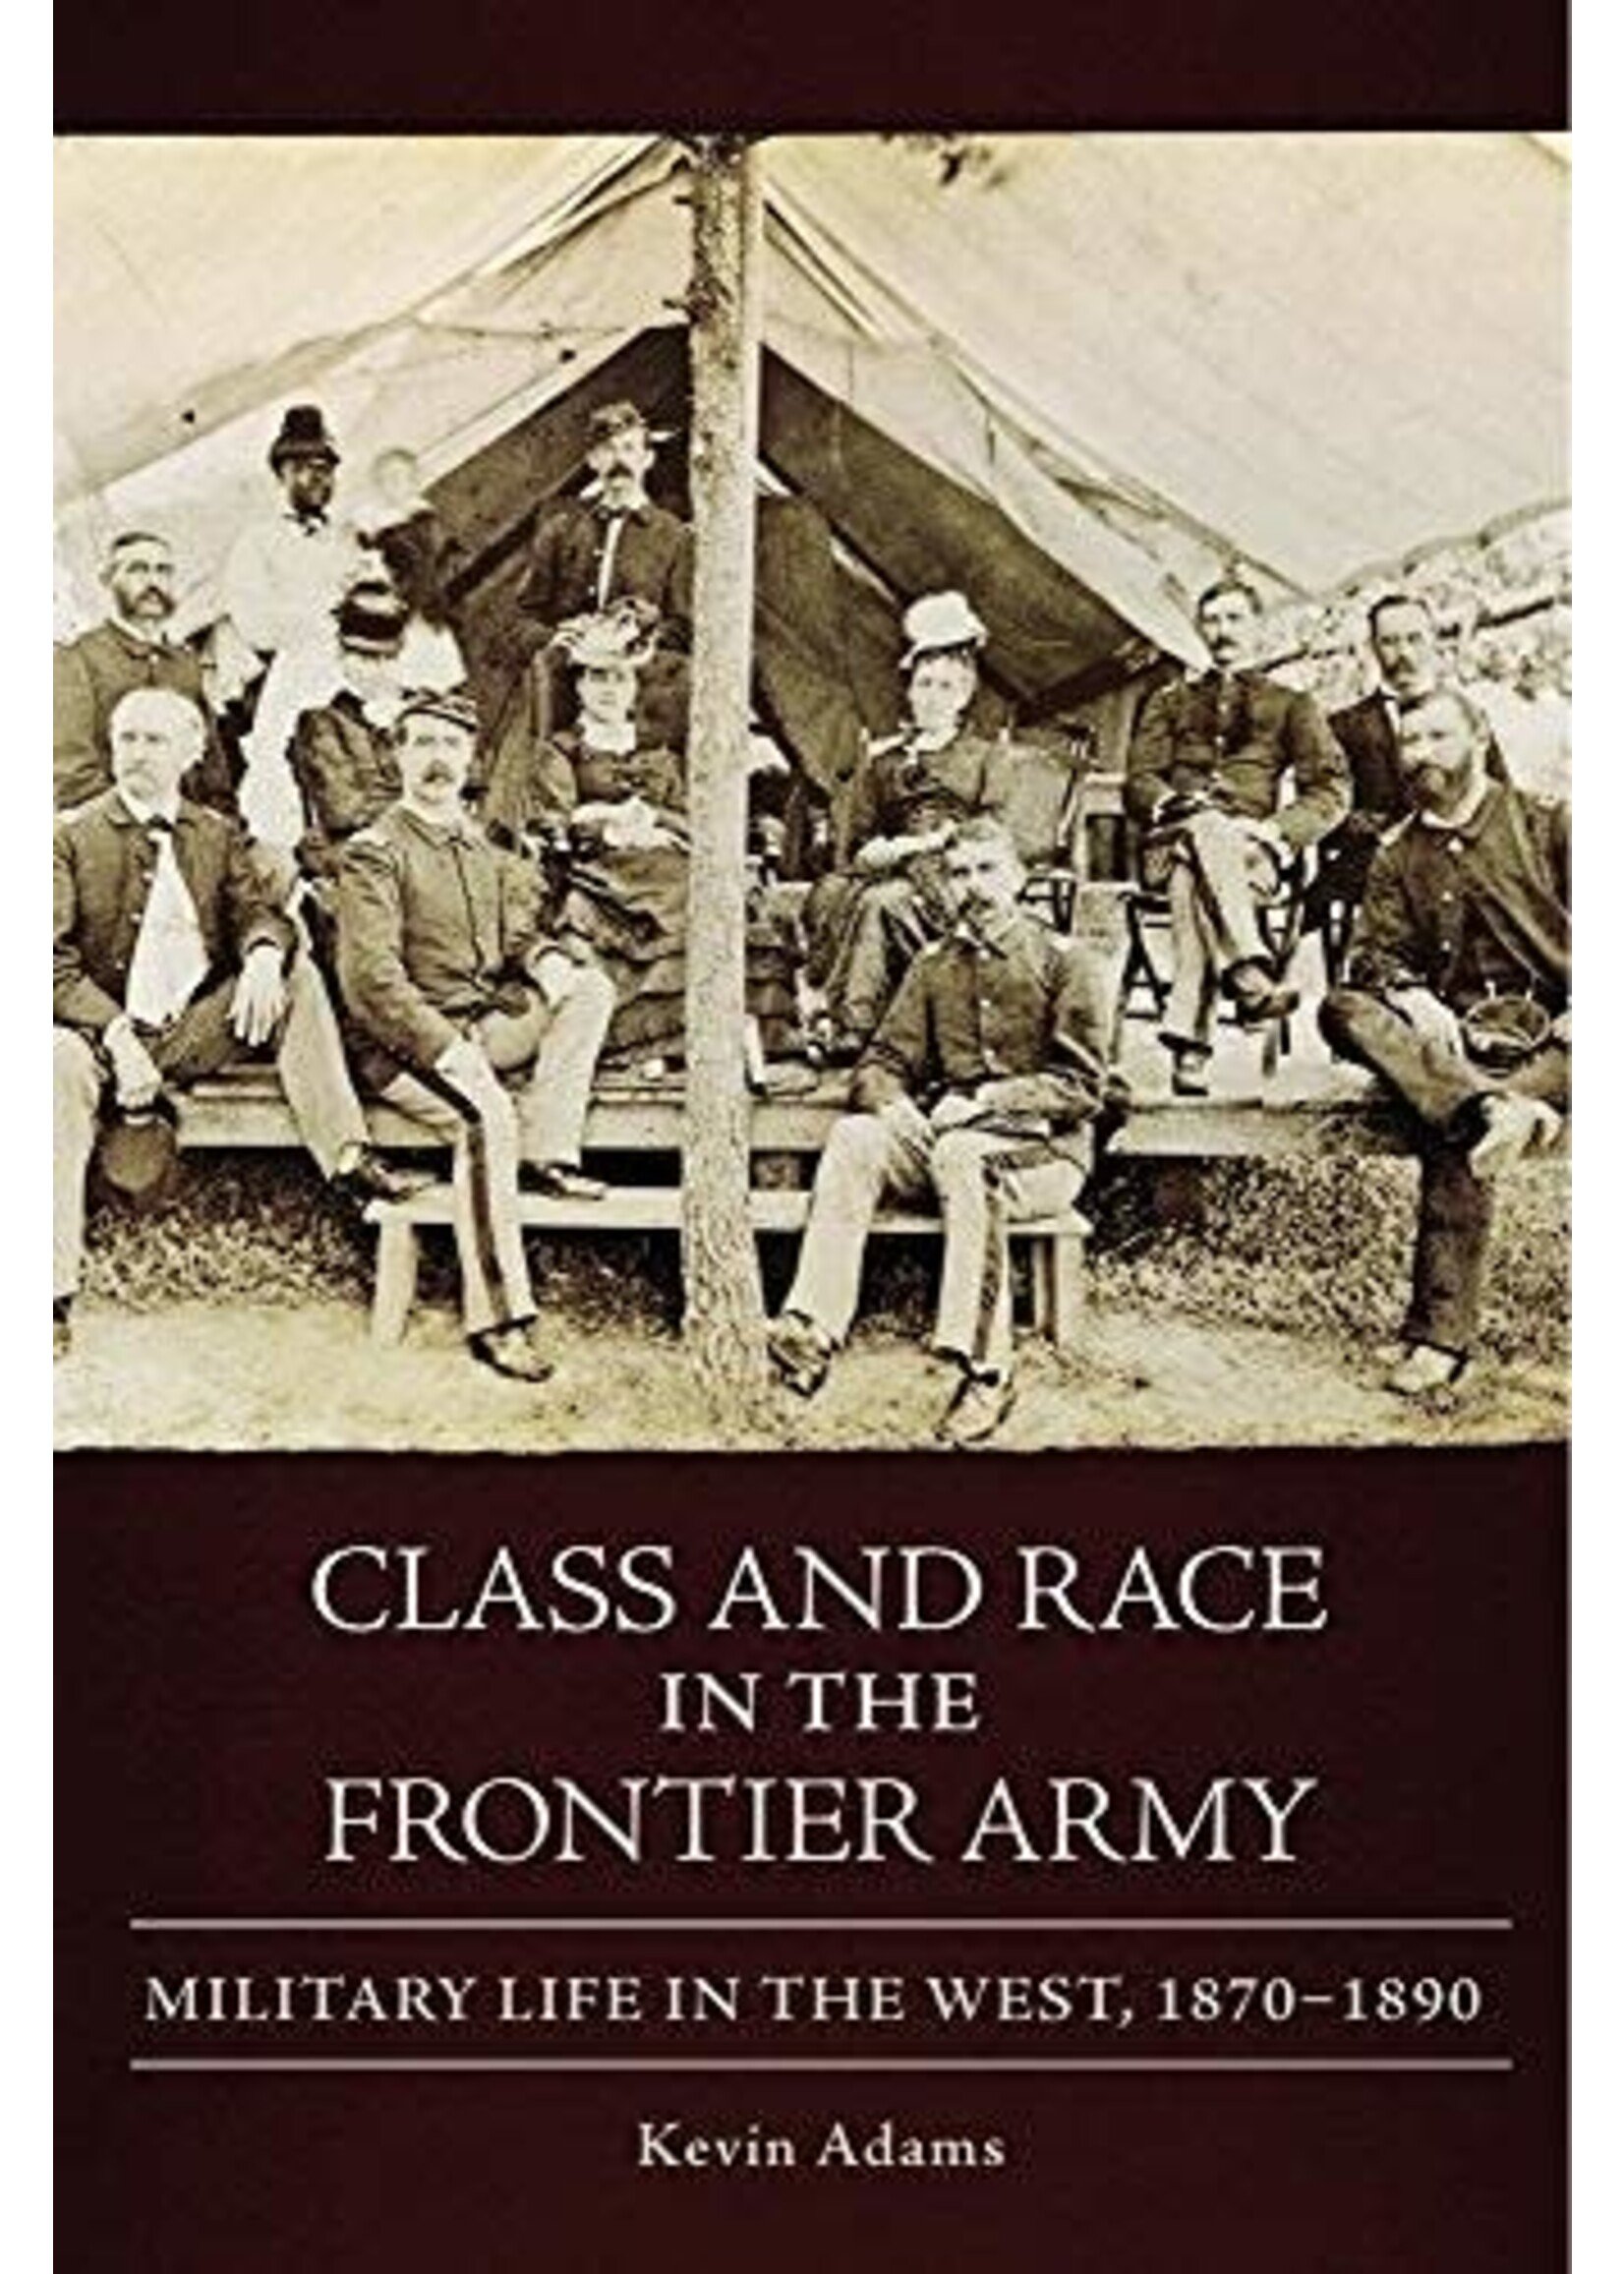 Class and Race in the Frontier Army: Military Life in the West, 1870-1890